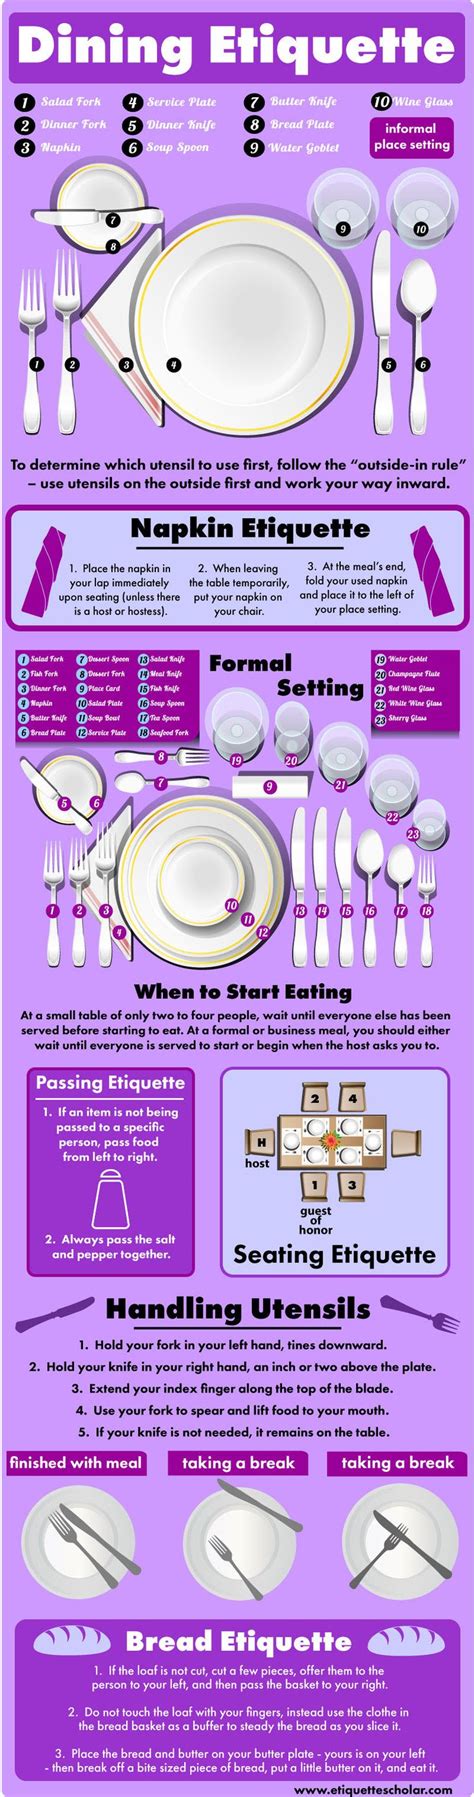 Great Dining Etiquette Tips - A complete dining etiquette reference with 100s of how-to lists ...